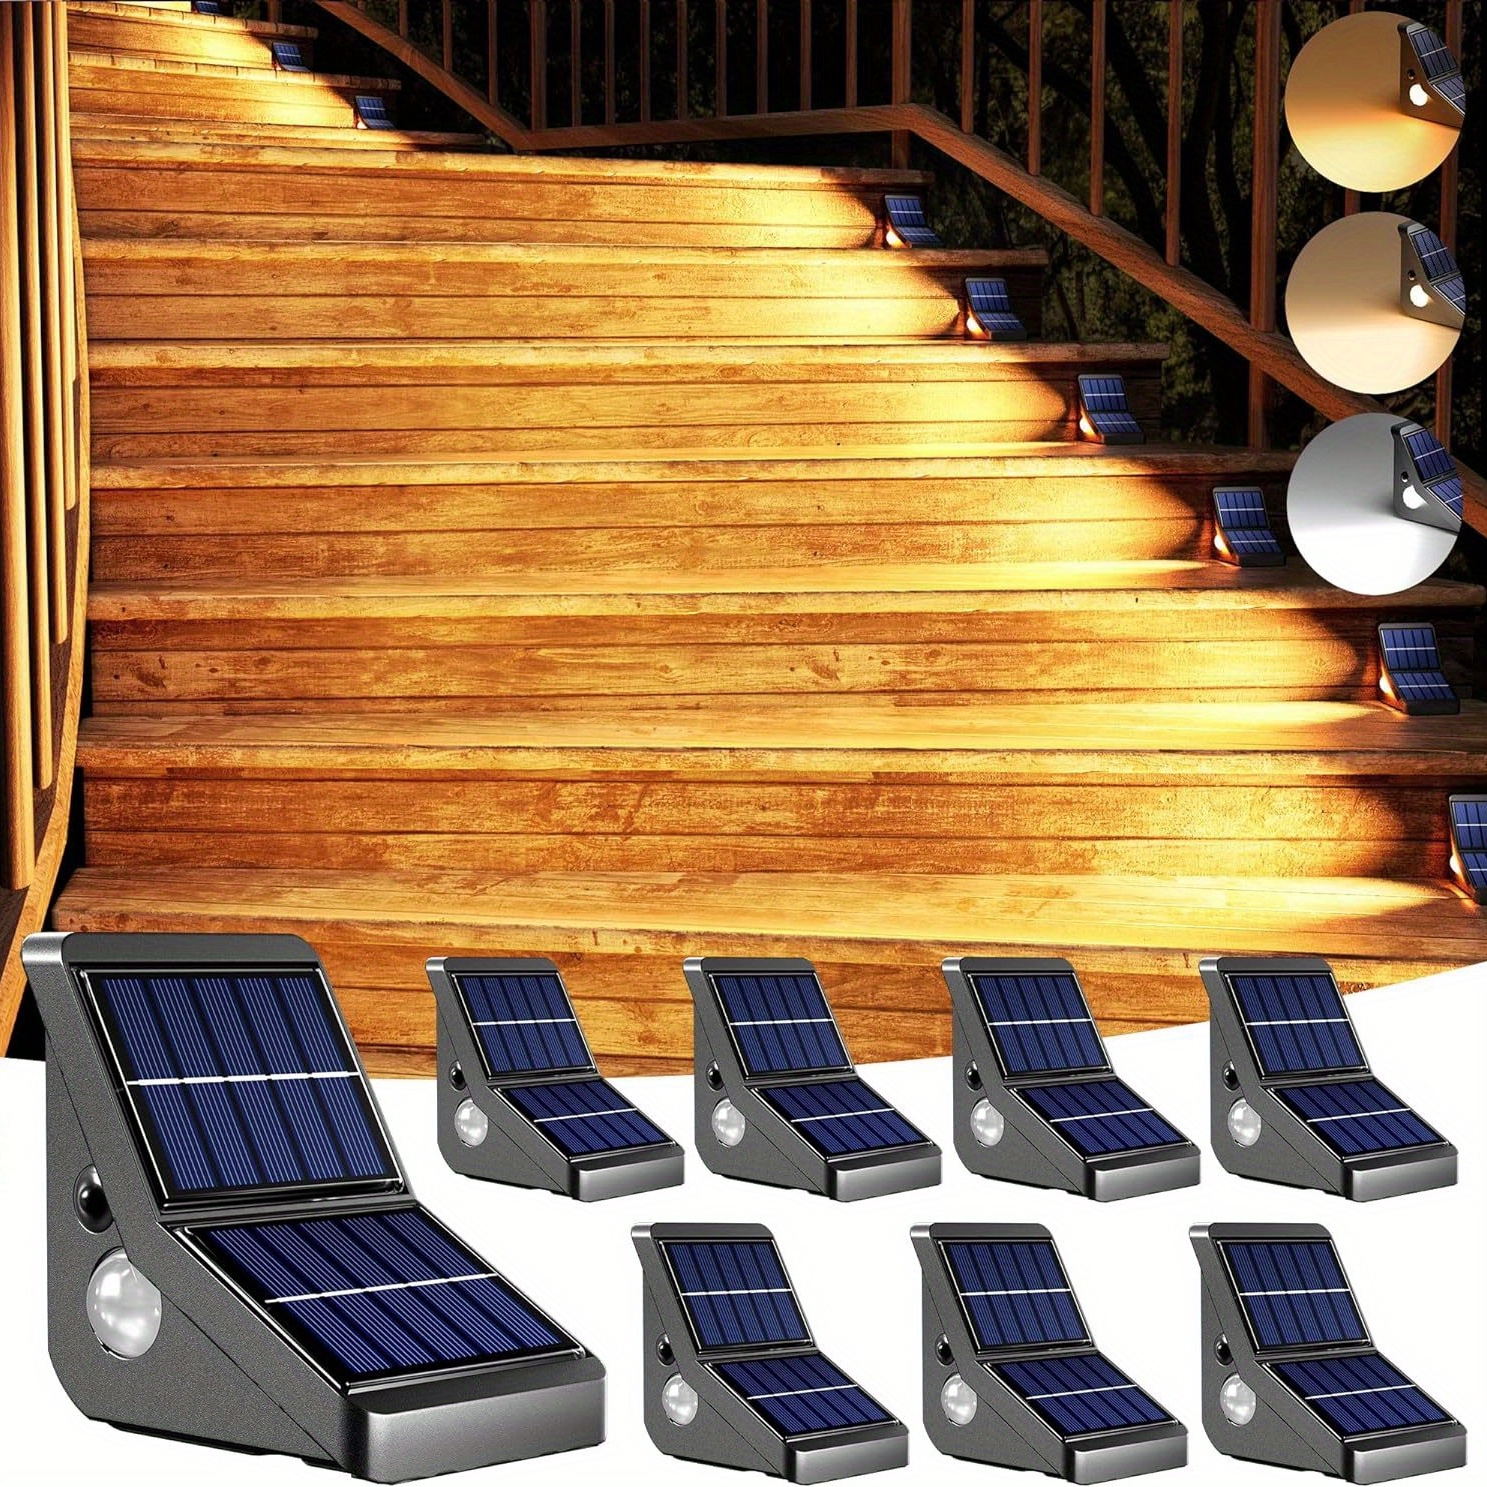 

Jackyled Solar Stair Lights 8 Pack Olar Step Lights Outdoor Waterproof Led Outdoor Step Lights, 3 Color Light Solar Outdoor Lights Decor For Stair, Deck, Front Step, Front Porch And Patio